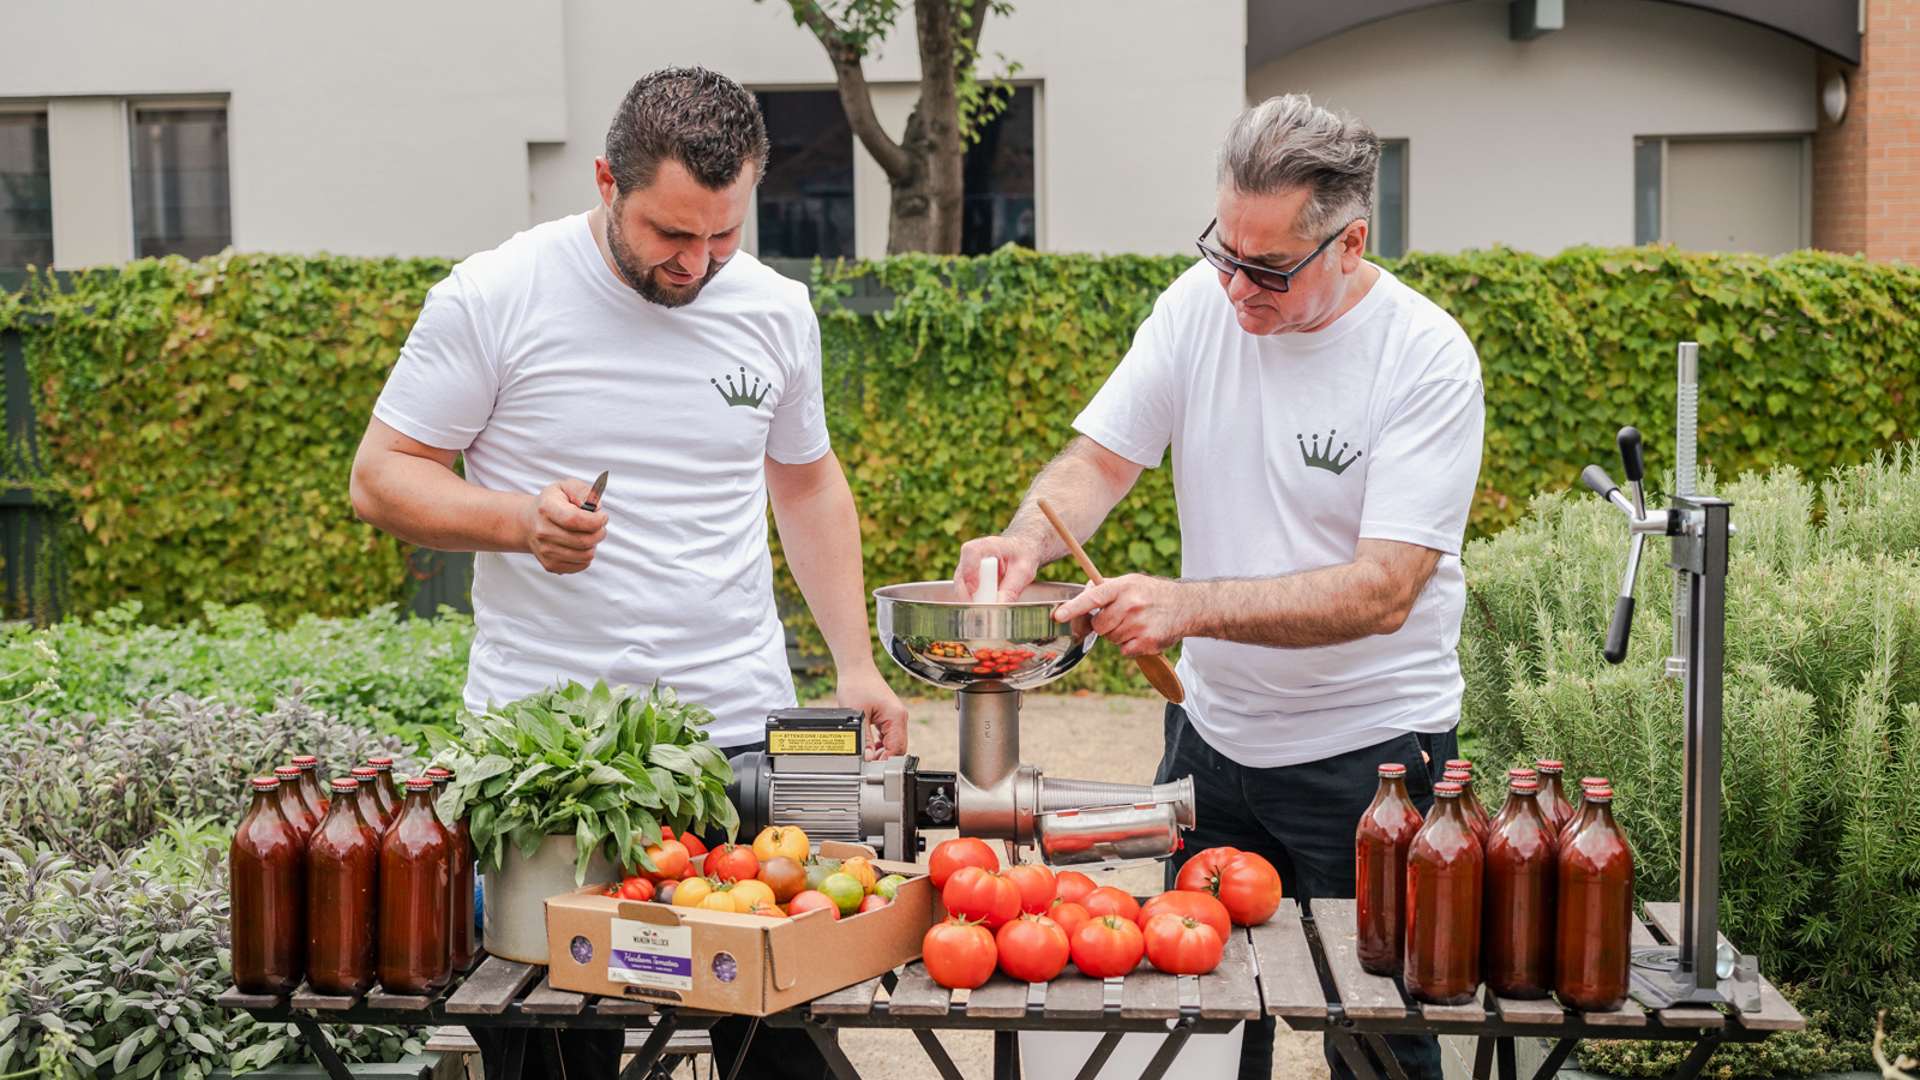 Passata-Making Day with Guy Grossi and Matteo Toffano